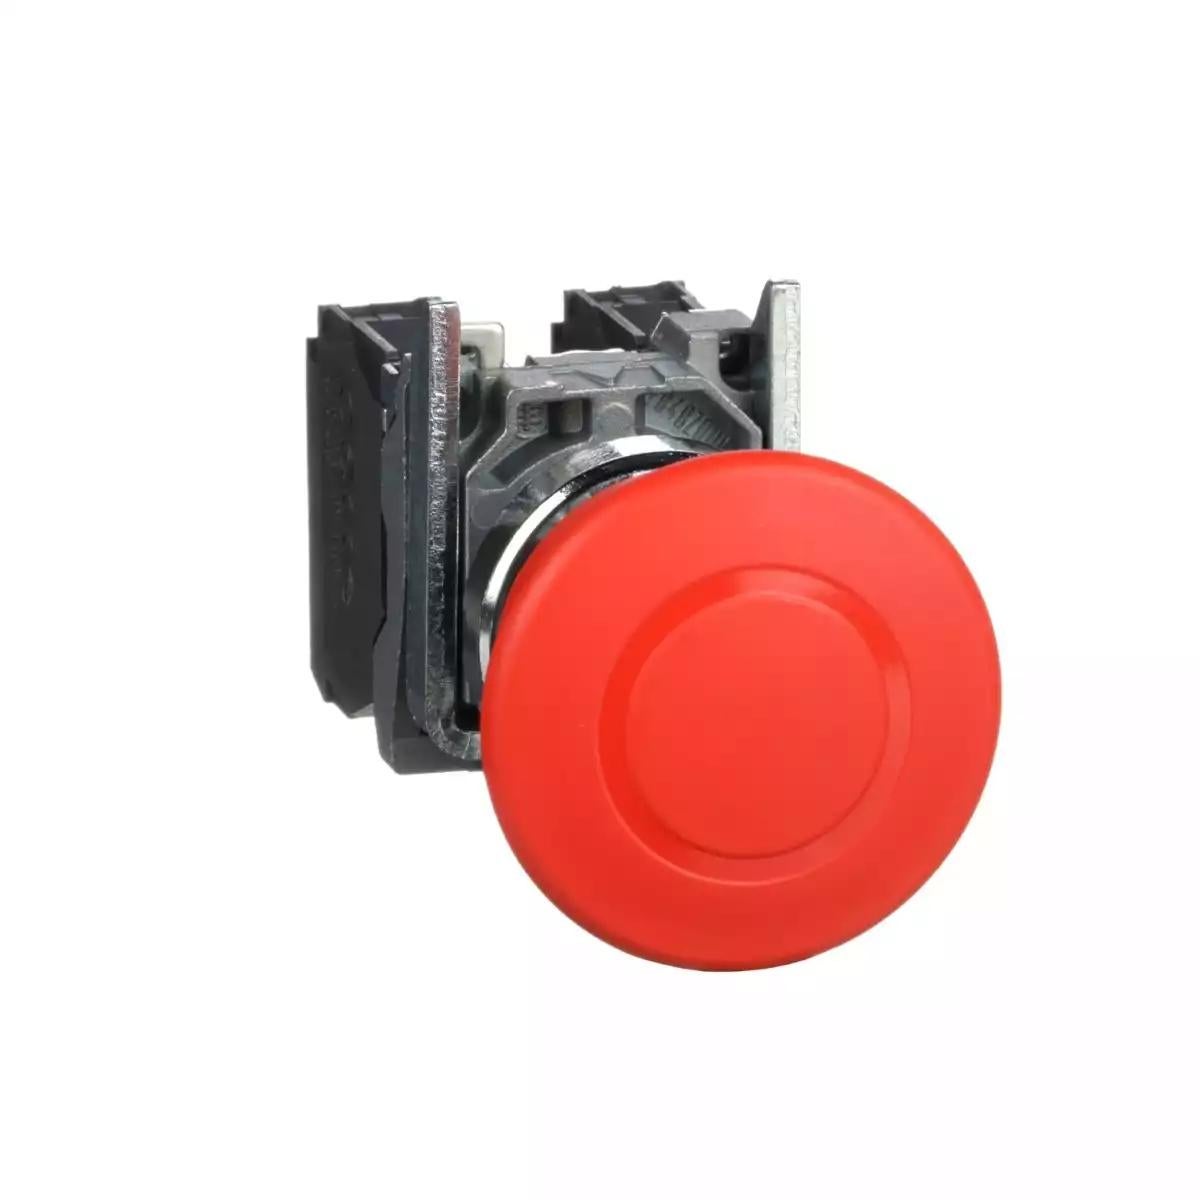 RED EMERGENCY STOP TRIGGER ISO13850 PUSH